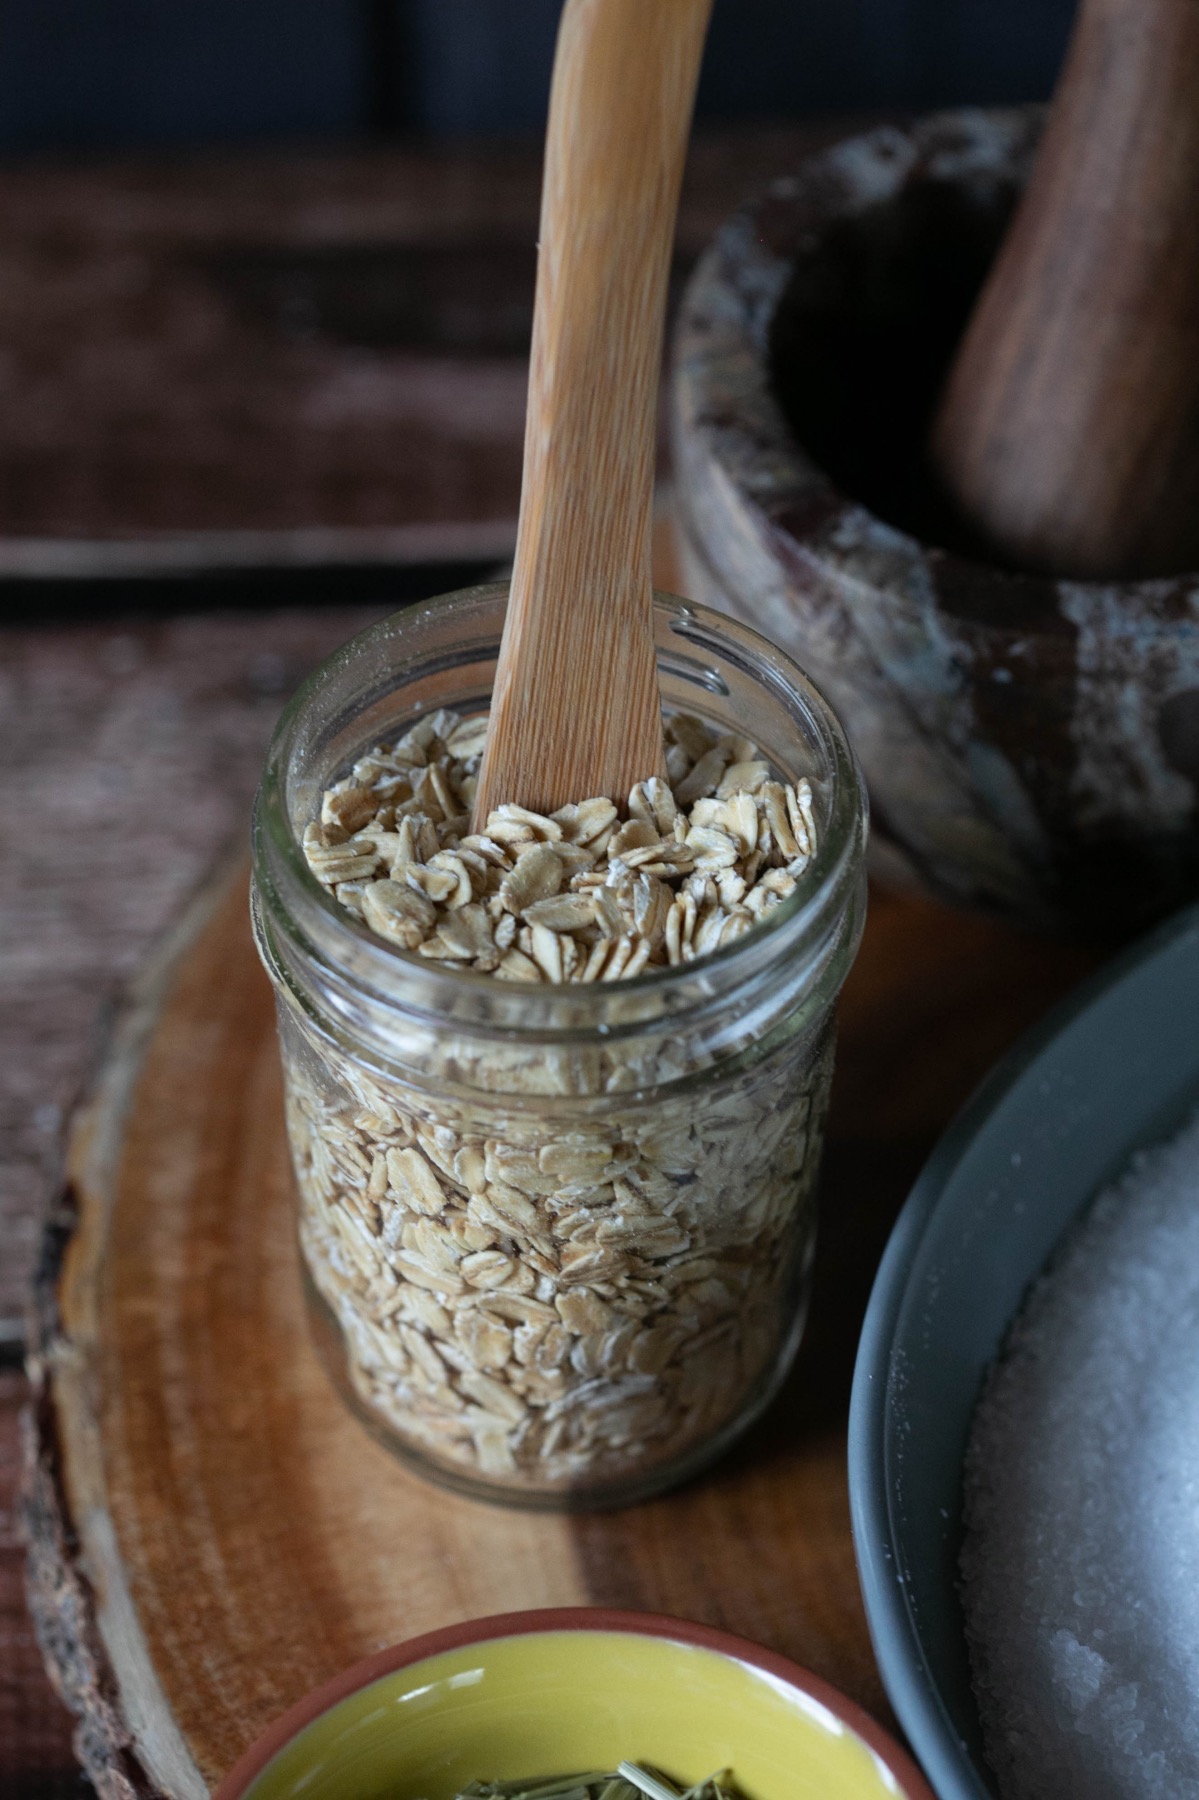 oats to add to homemade forest bath soak recipe